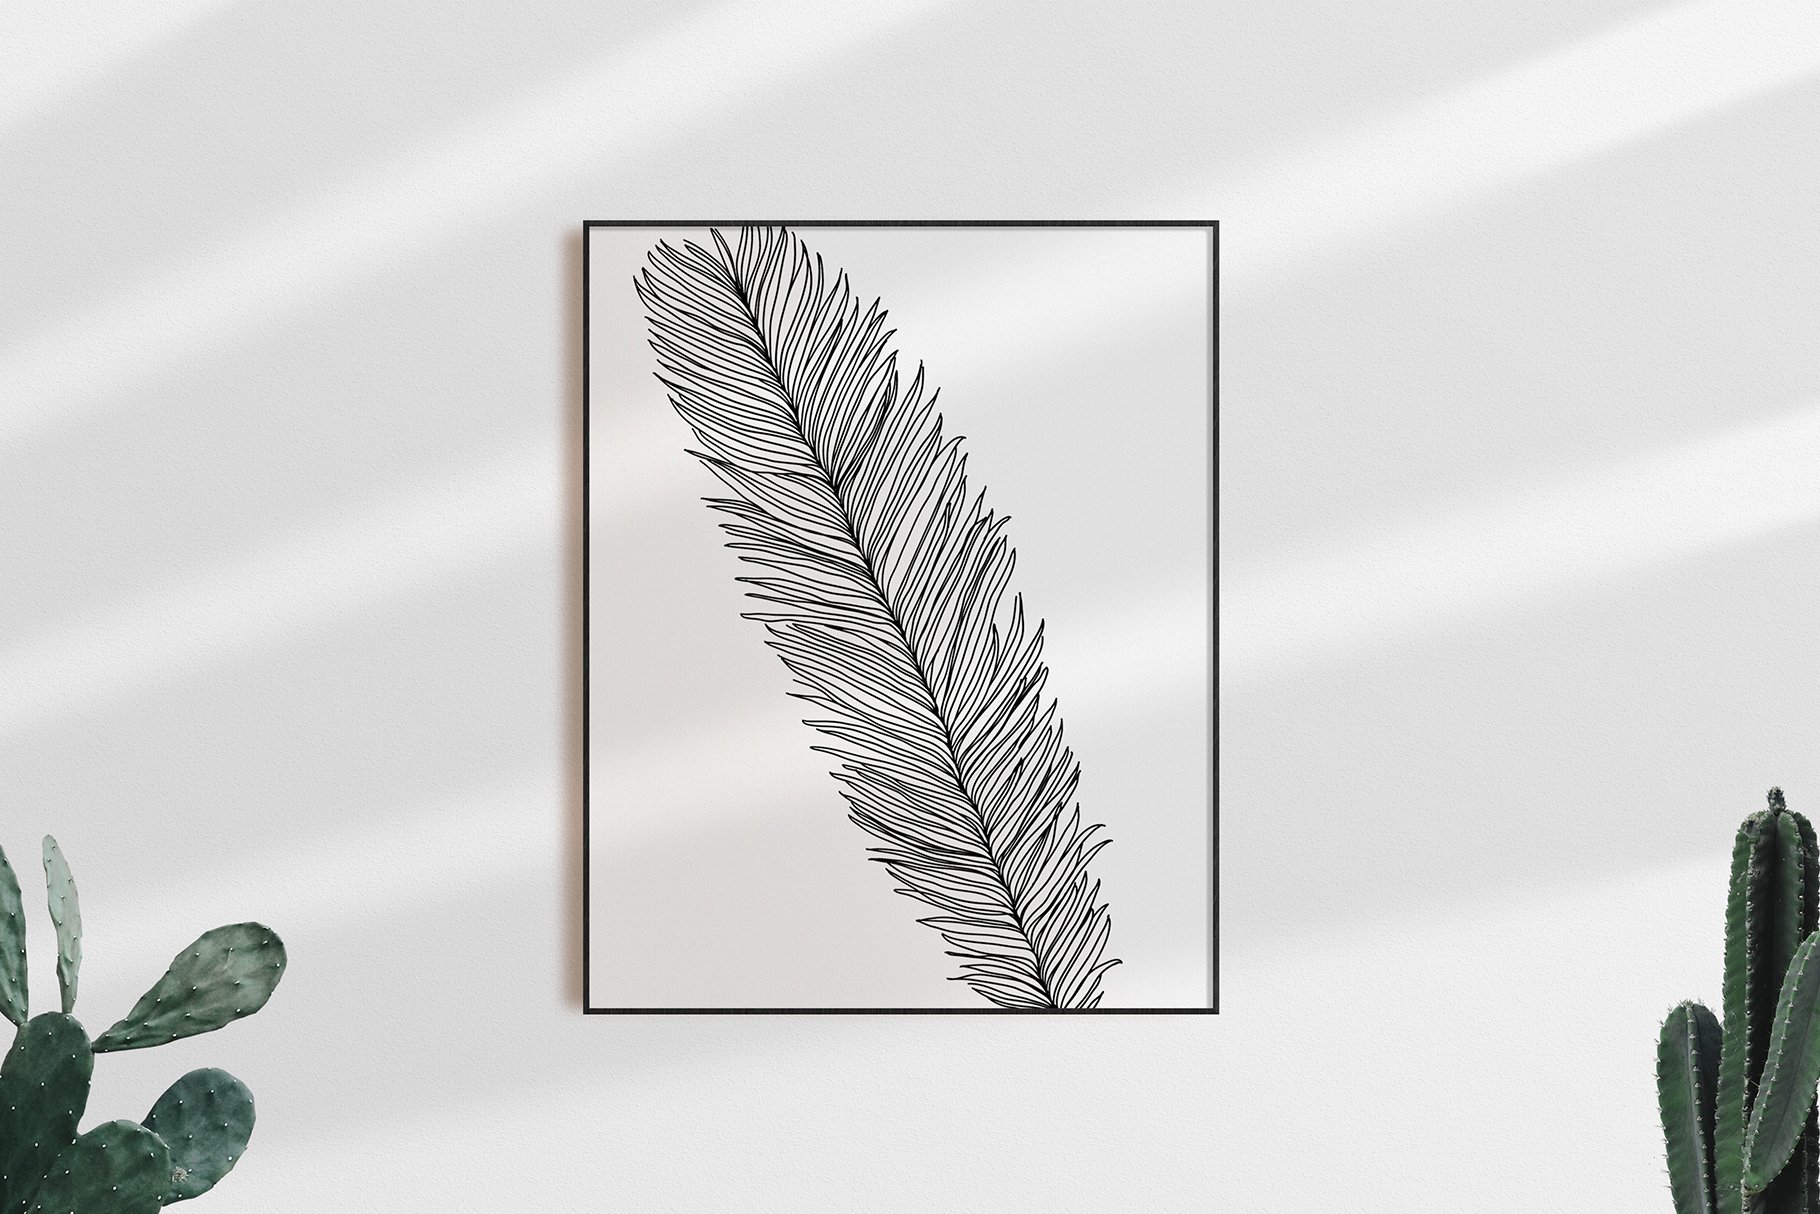 Black and white photo of a leaf in a frame.